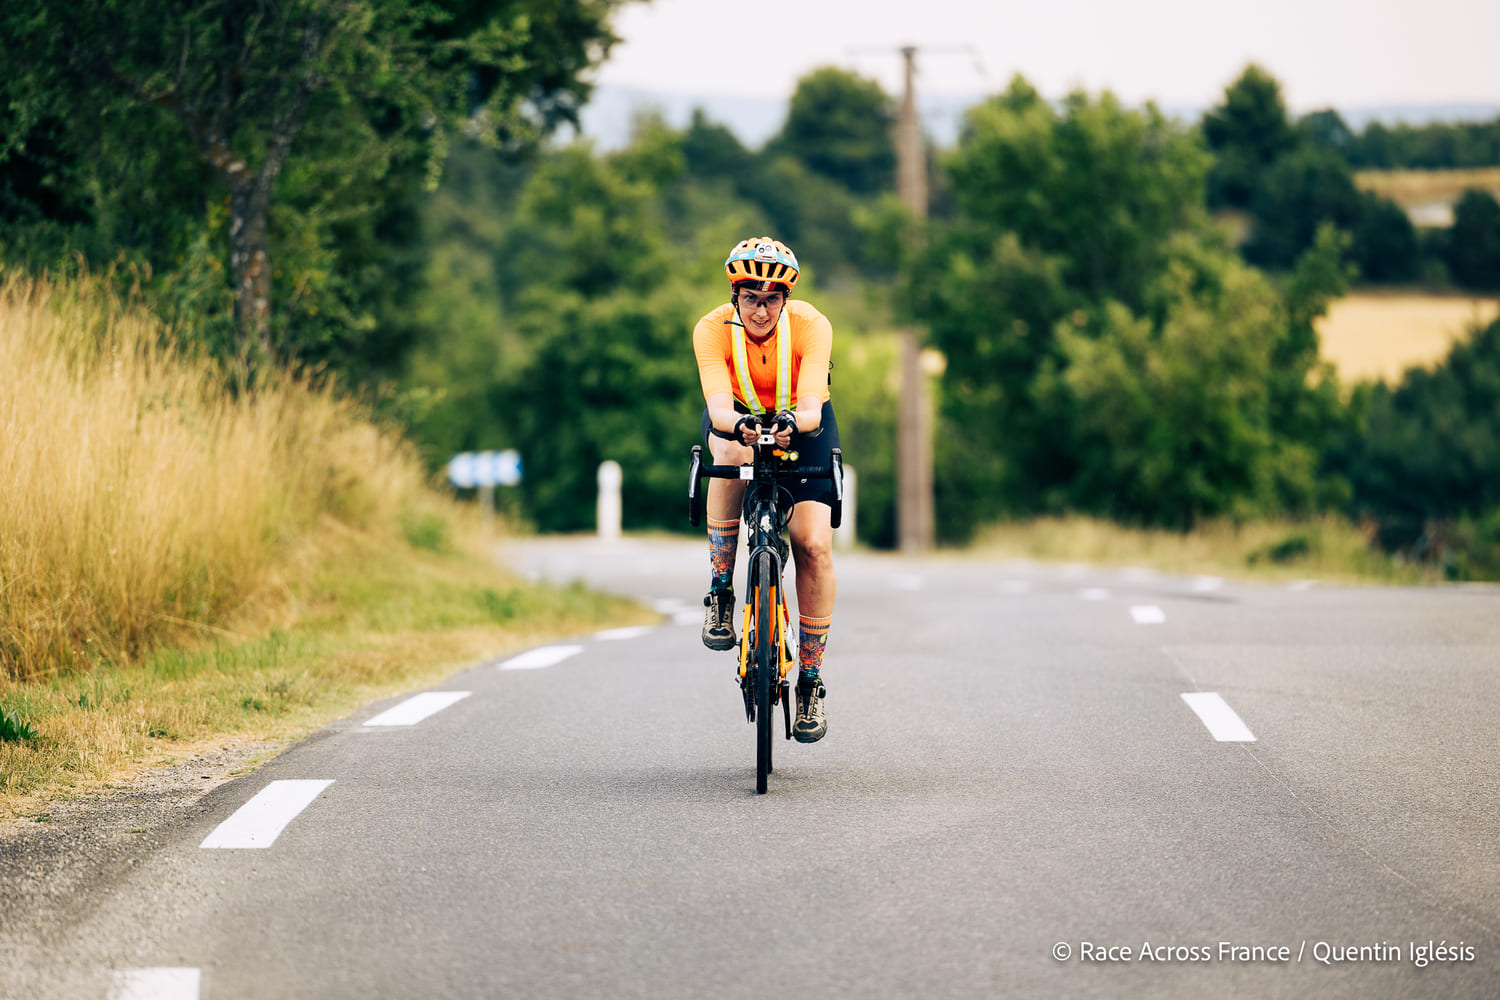 Race Across France RAF ultra-cycling route Patrick Gilles